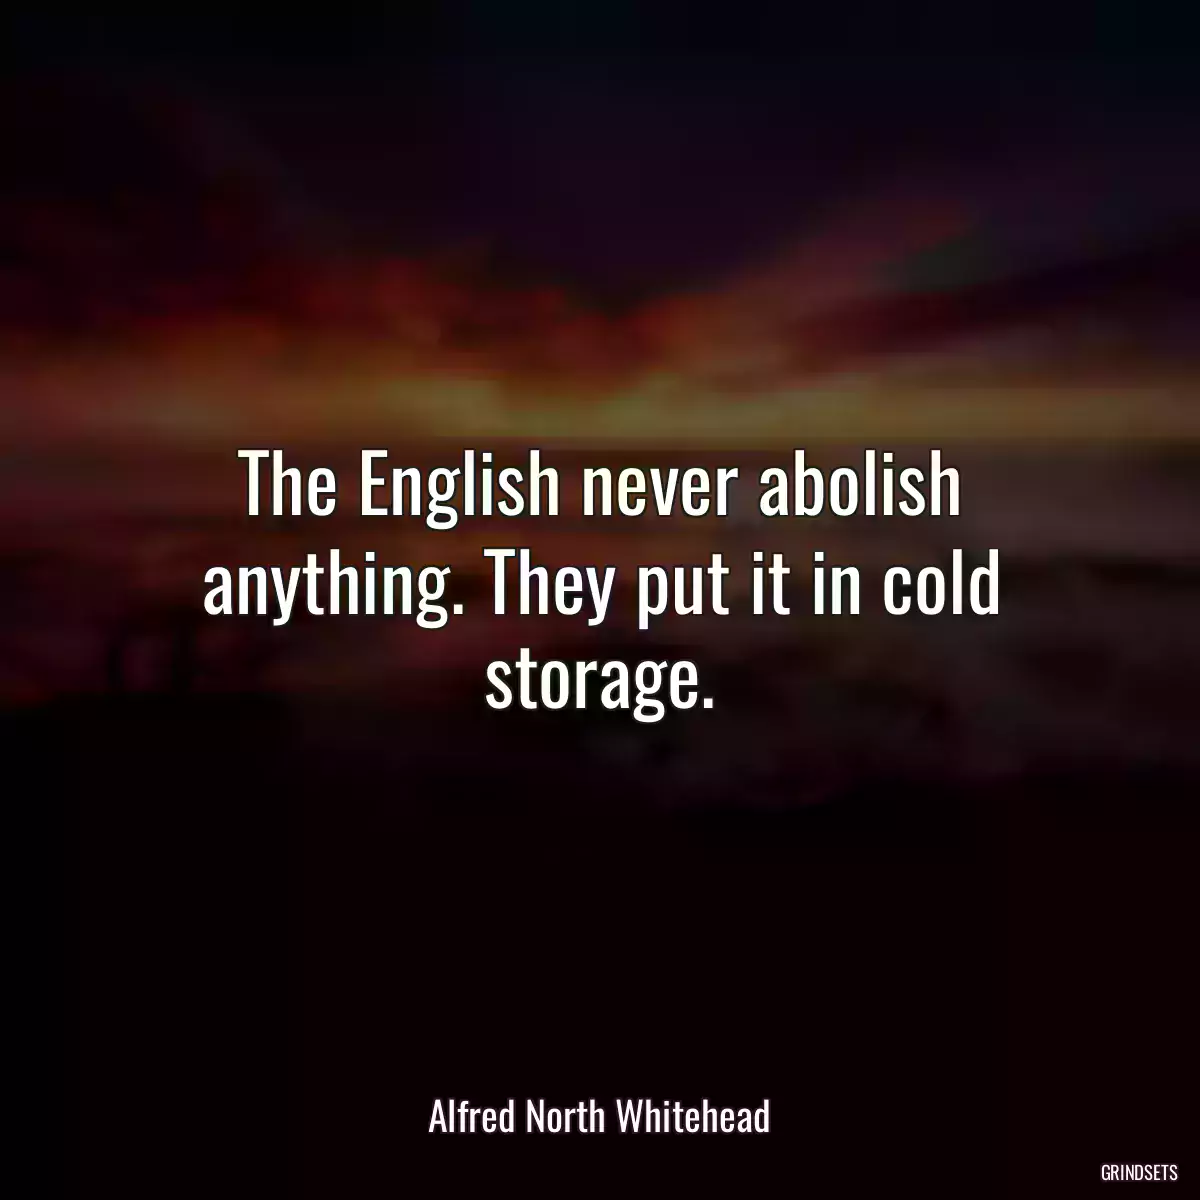 The English never abolish anything. They put it in cold storage.